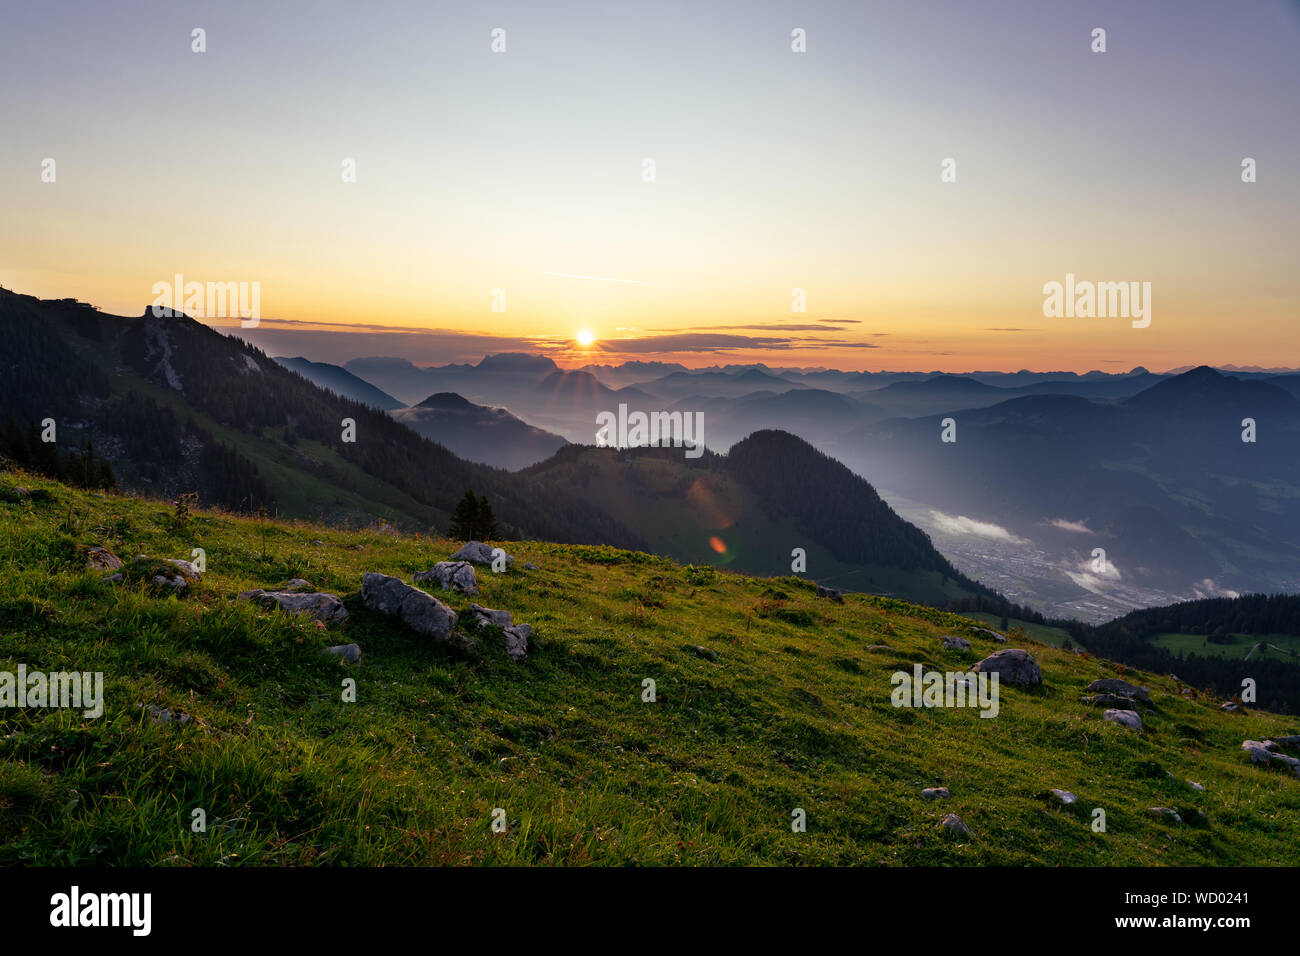 Sunrise over the tyrol alm high over the mountains scenery Stock Photo